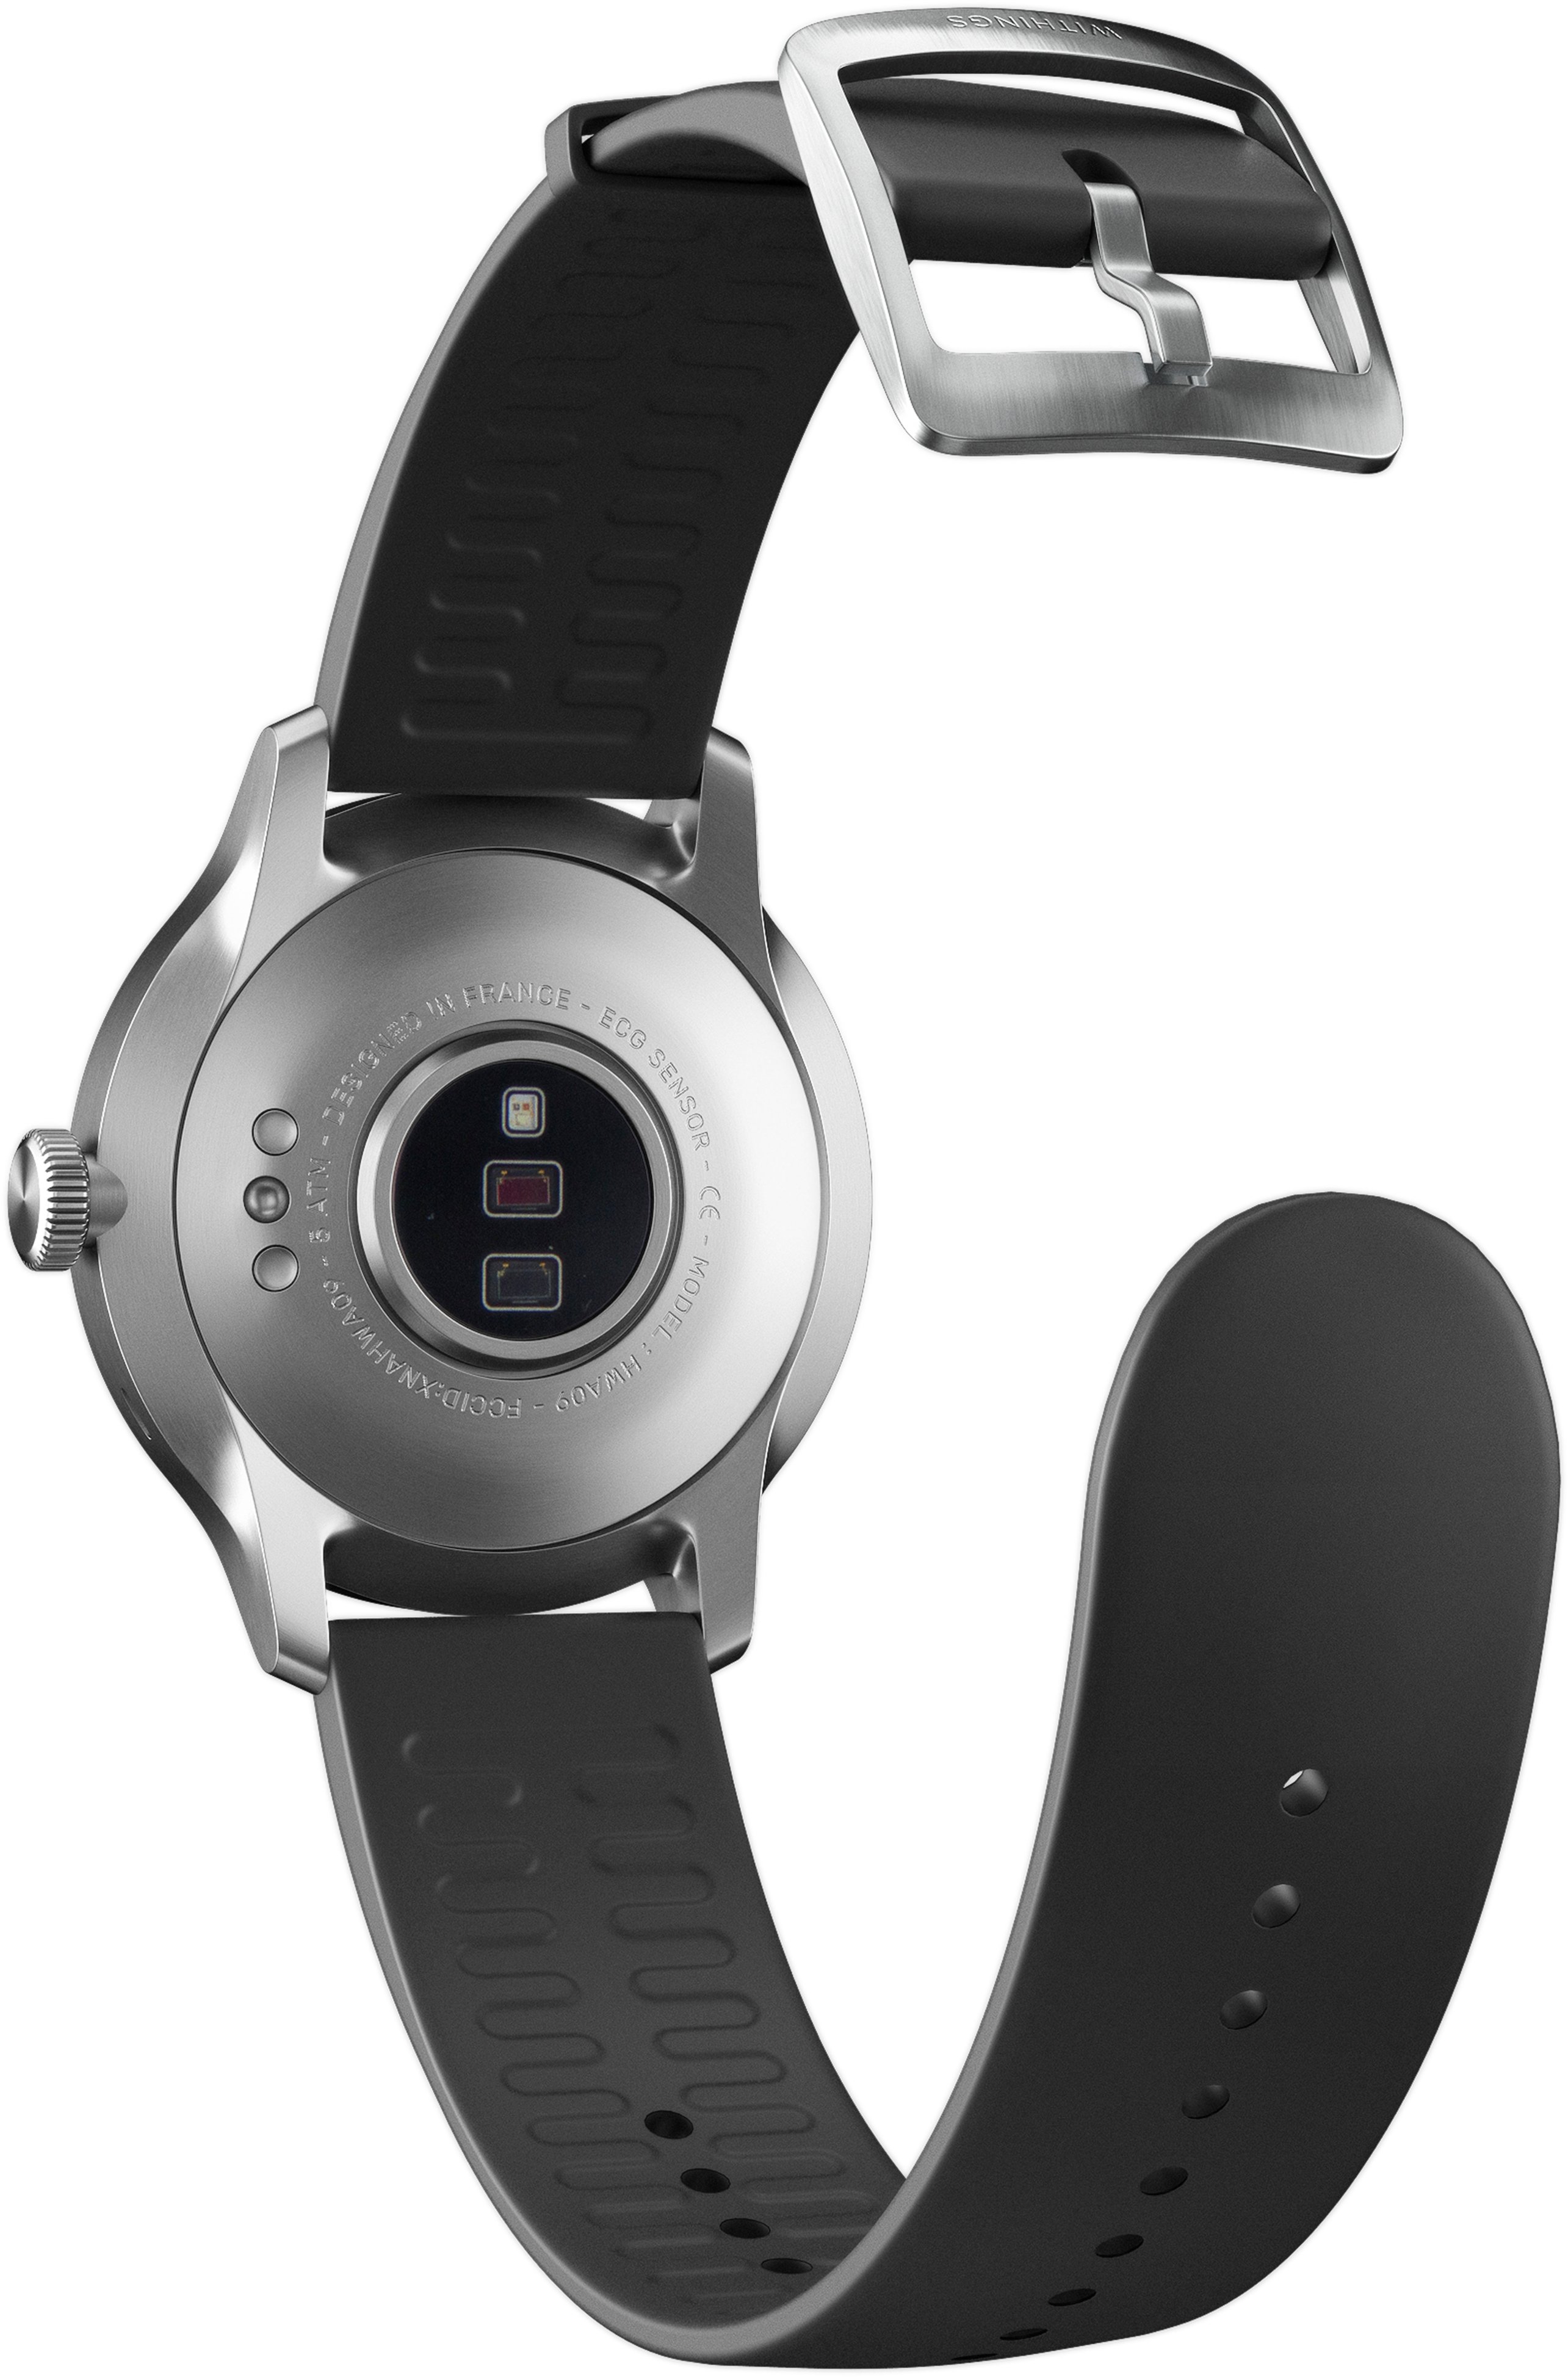 Withings SCANWATCH Hybrid Smartwatch with ECG, heart rate and